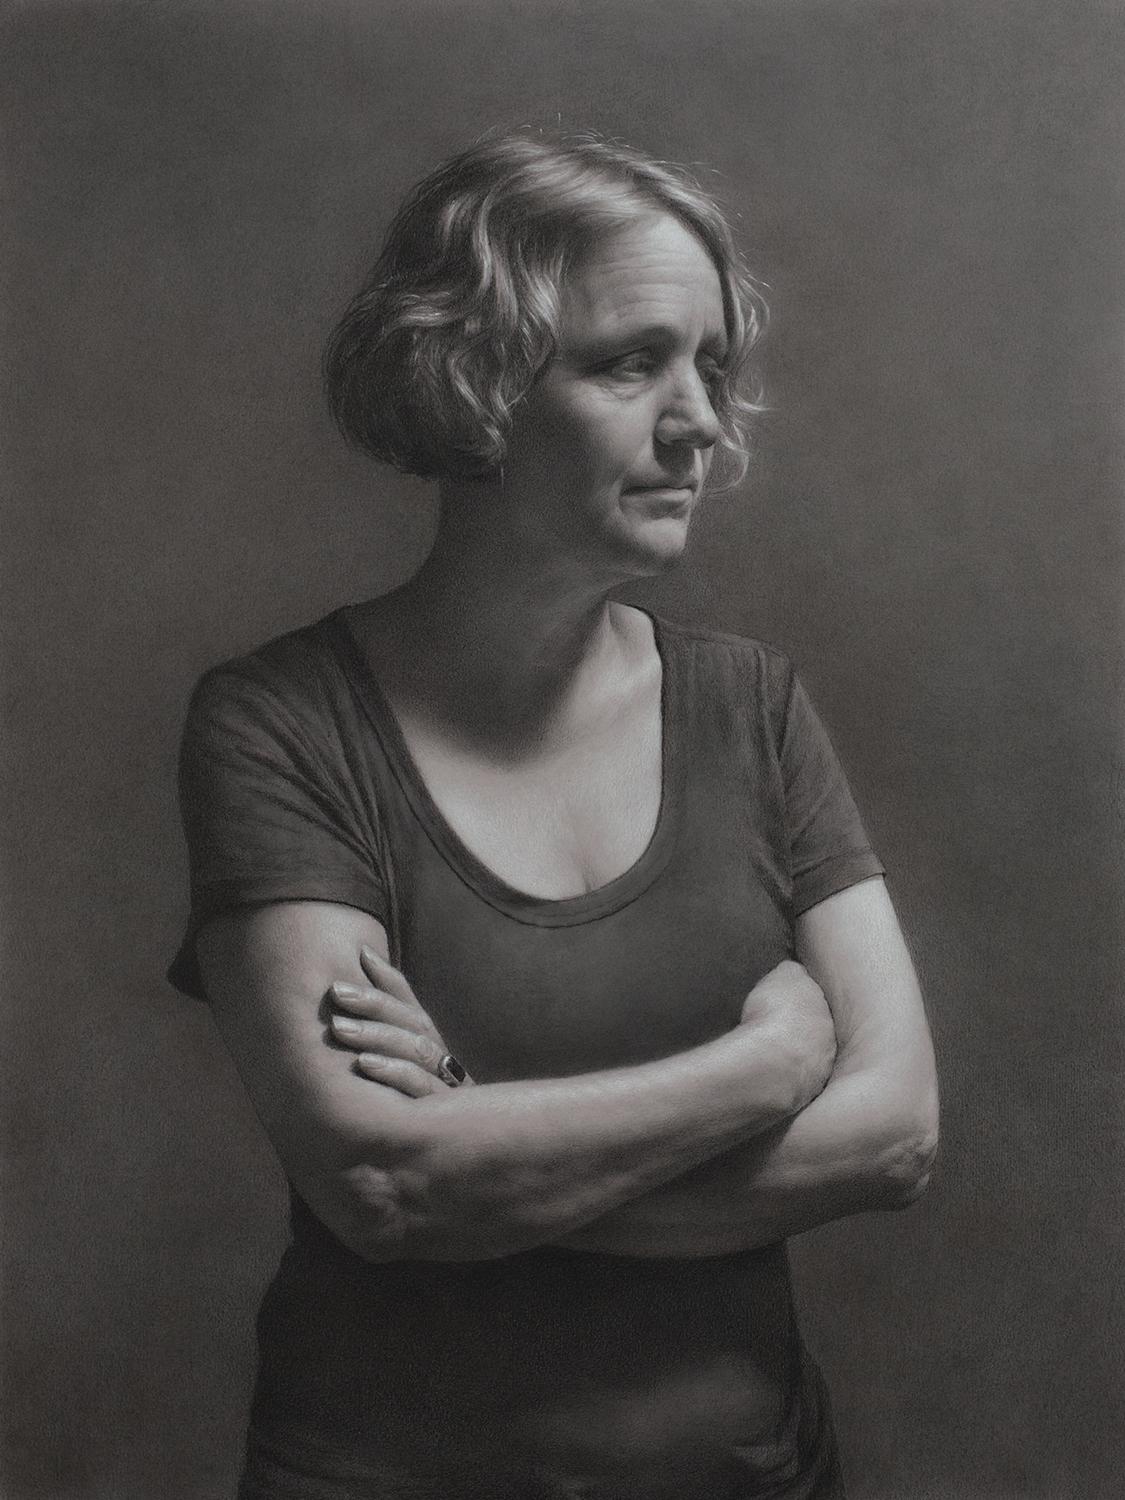 “Writer's Block” by David Jamieson of Illinois. Graphite, carbon black and white chalk on gray paper; 24 inches by 18 inches. (Courtesy of the Portrait Society of America)